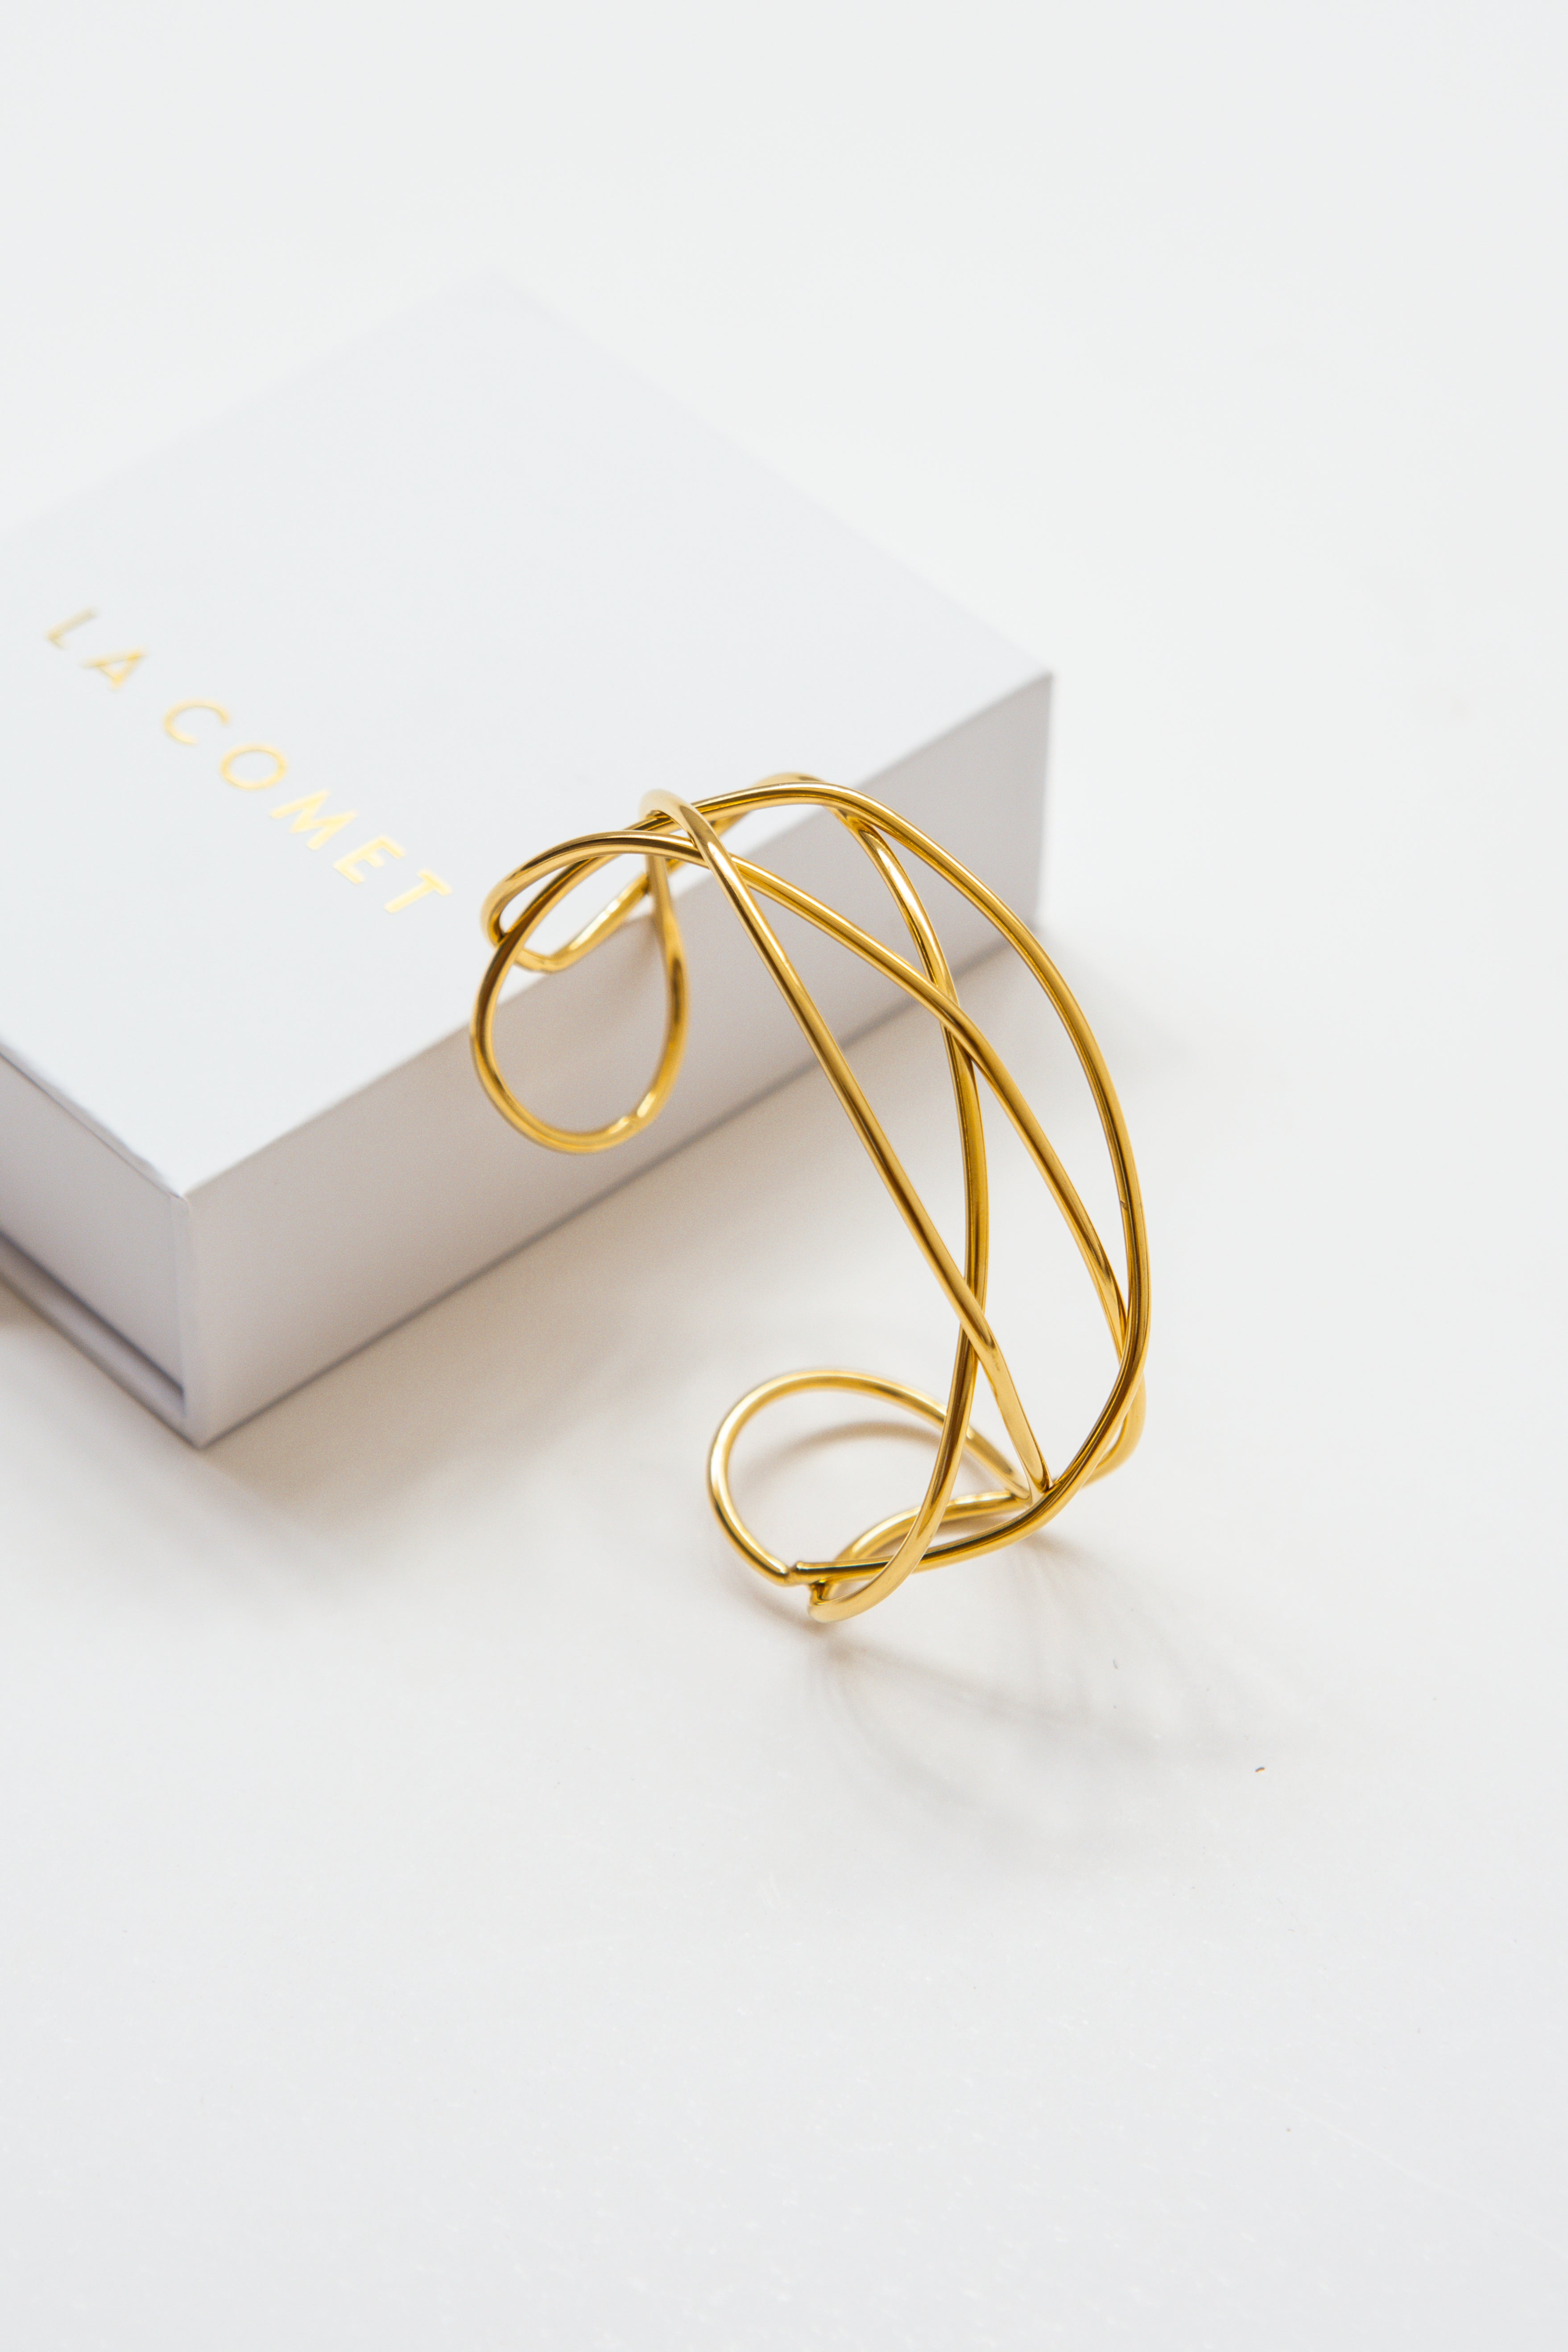 ABSTRACT LINES BRACELET